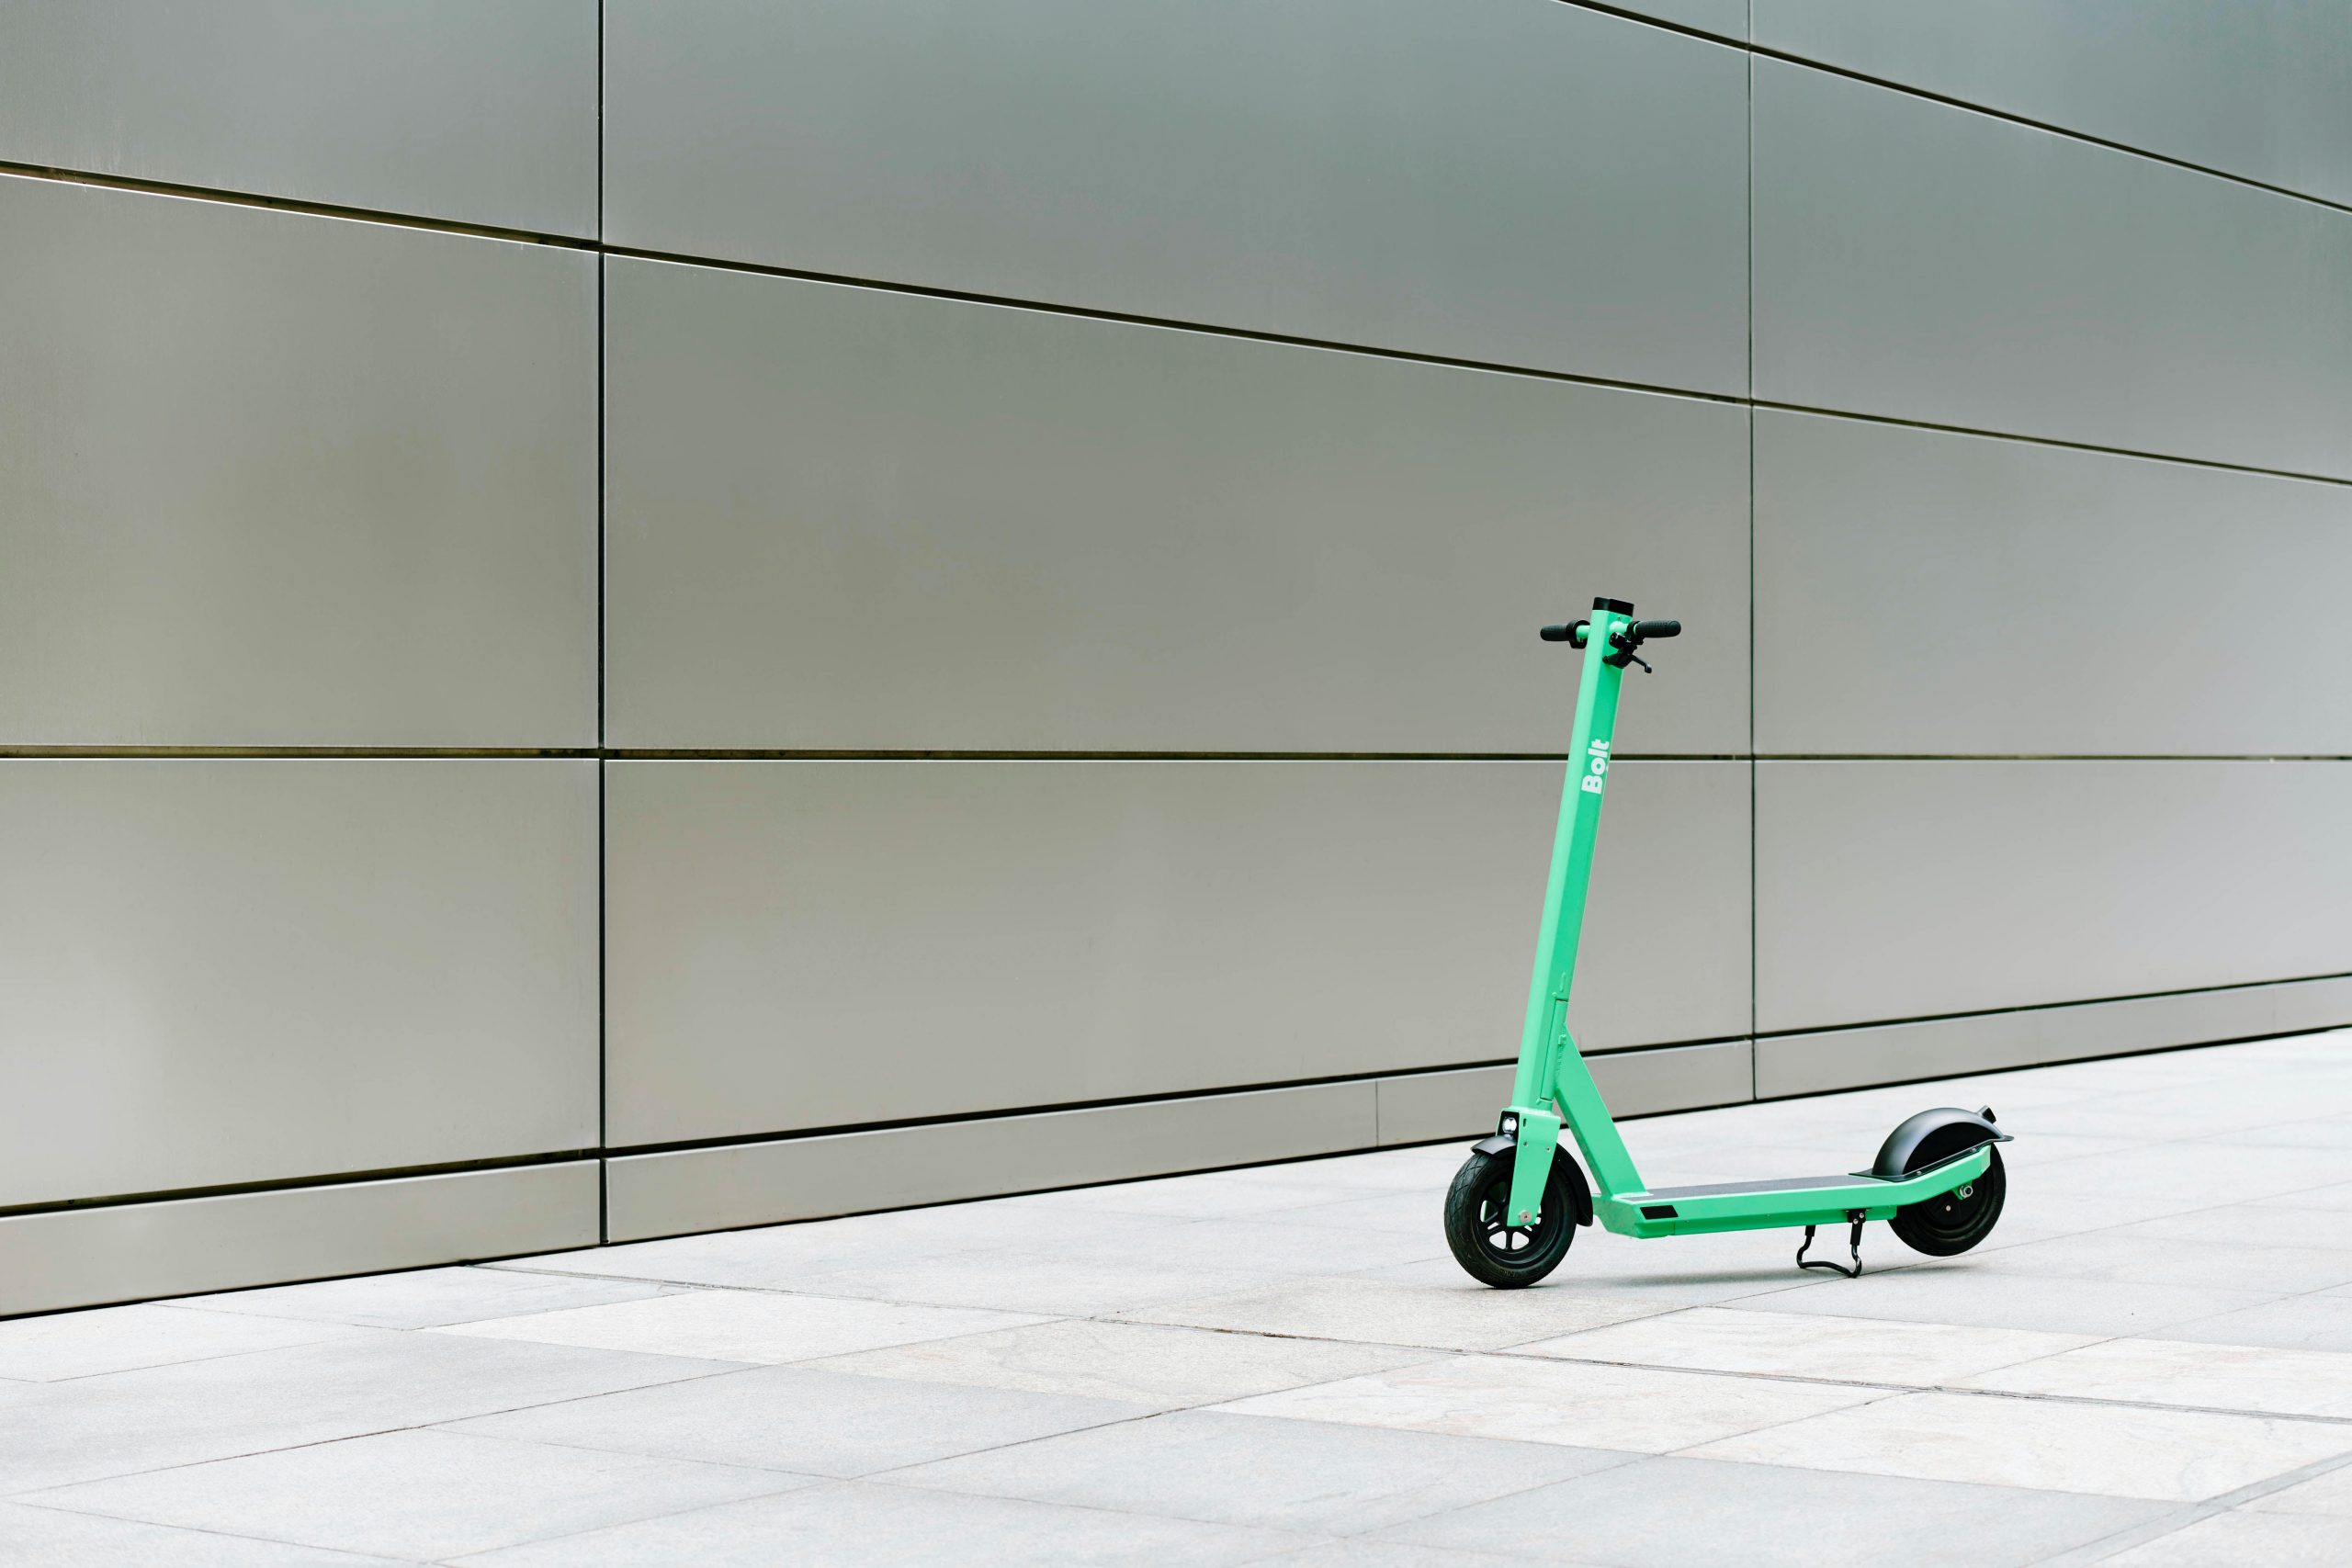 E-scooters will no longer be allowed on public roads. Image credits: Bolt on Unsplash